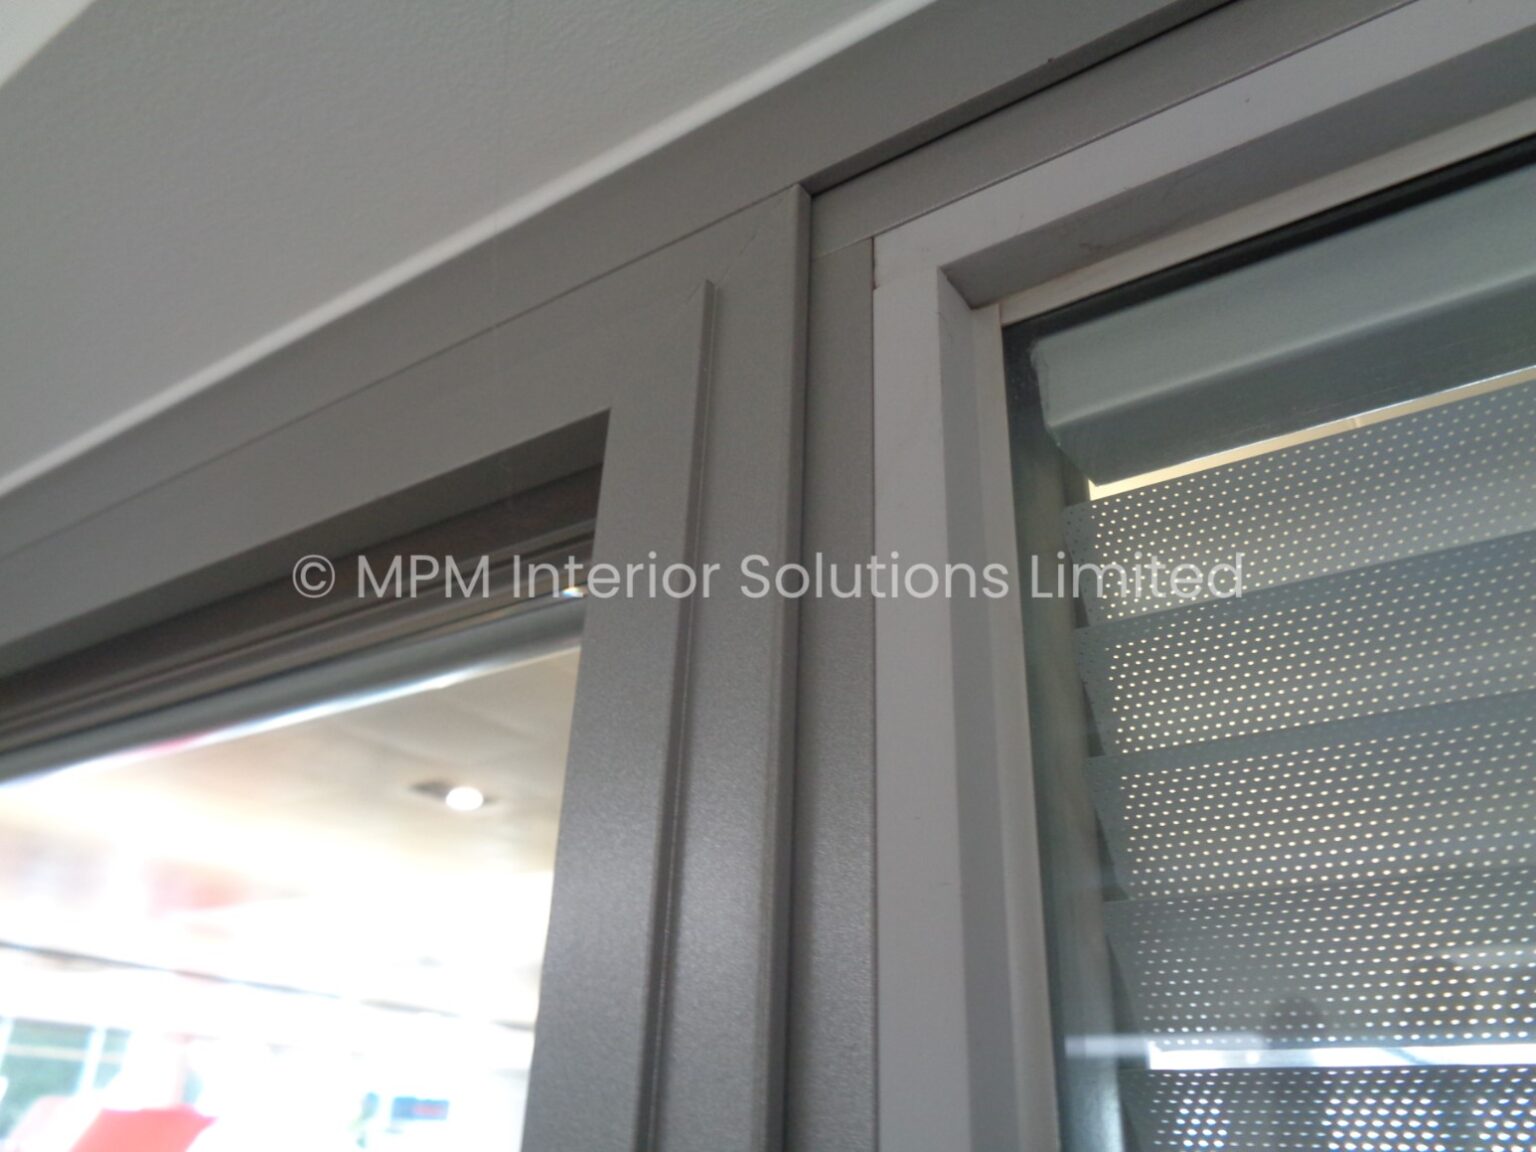 75mm > 100mm Demountable Office Partitioning, Caffyns PLC (Portslade, East Sussex), MPM Interior Solutions Limited